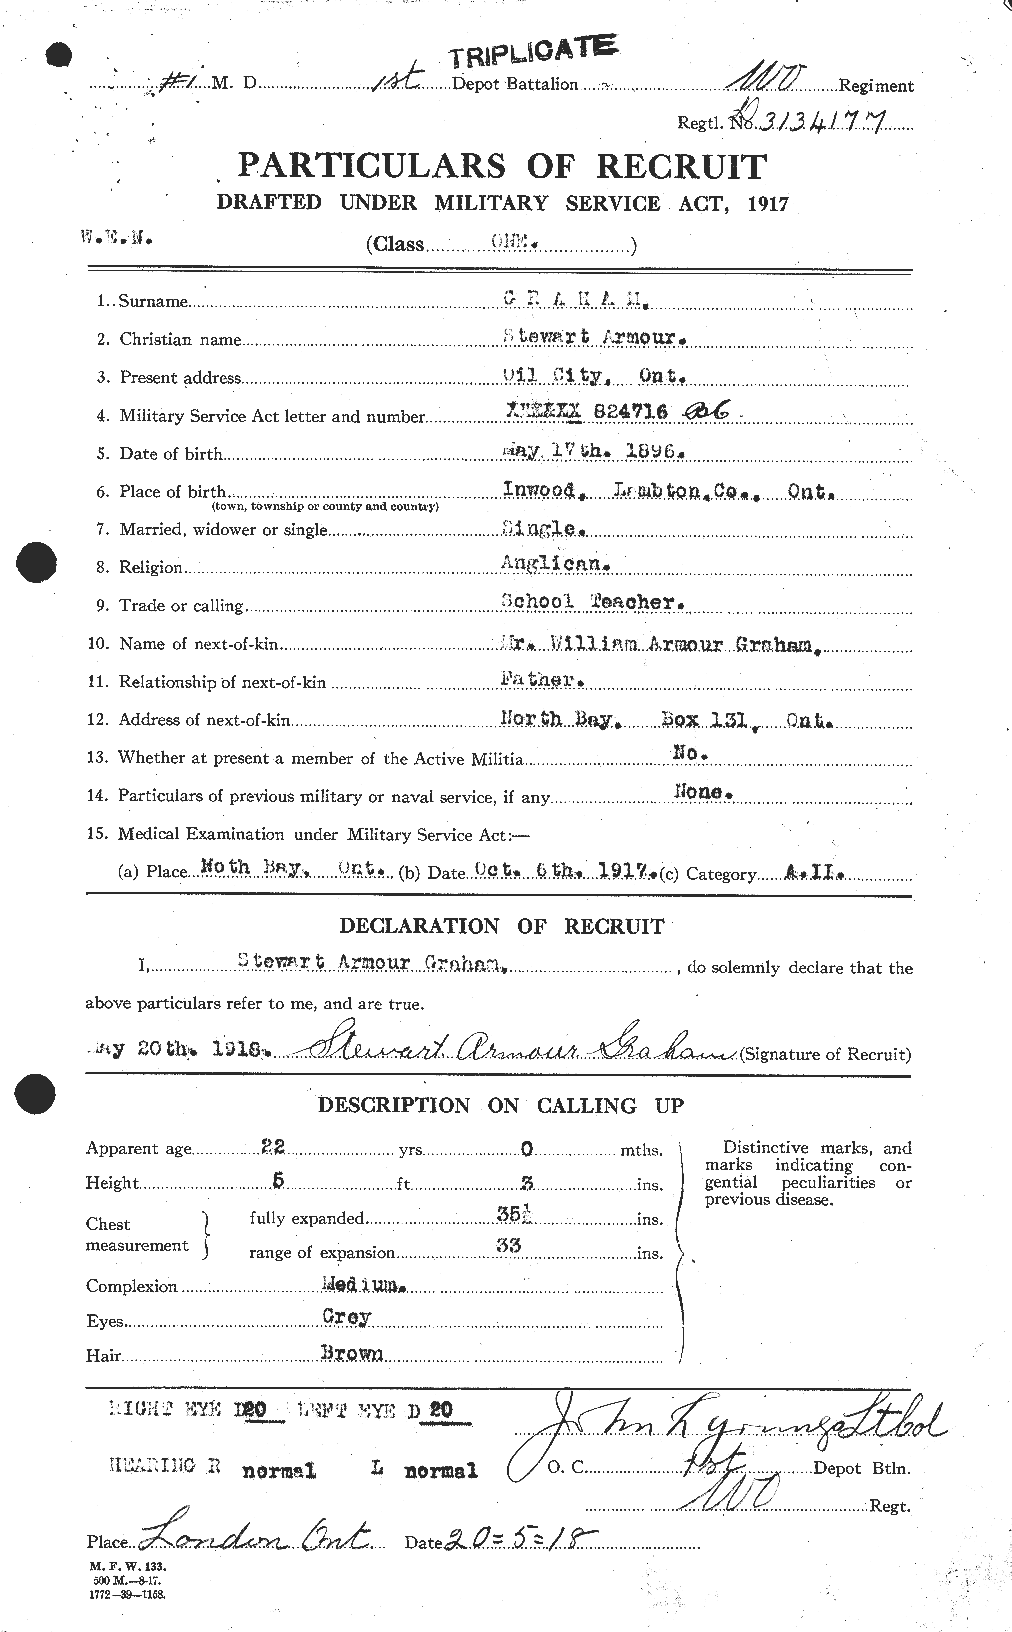 Personnel Records of the First World War - CEF 359472a